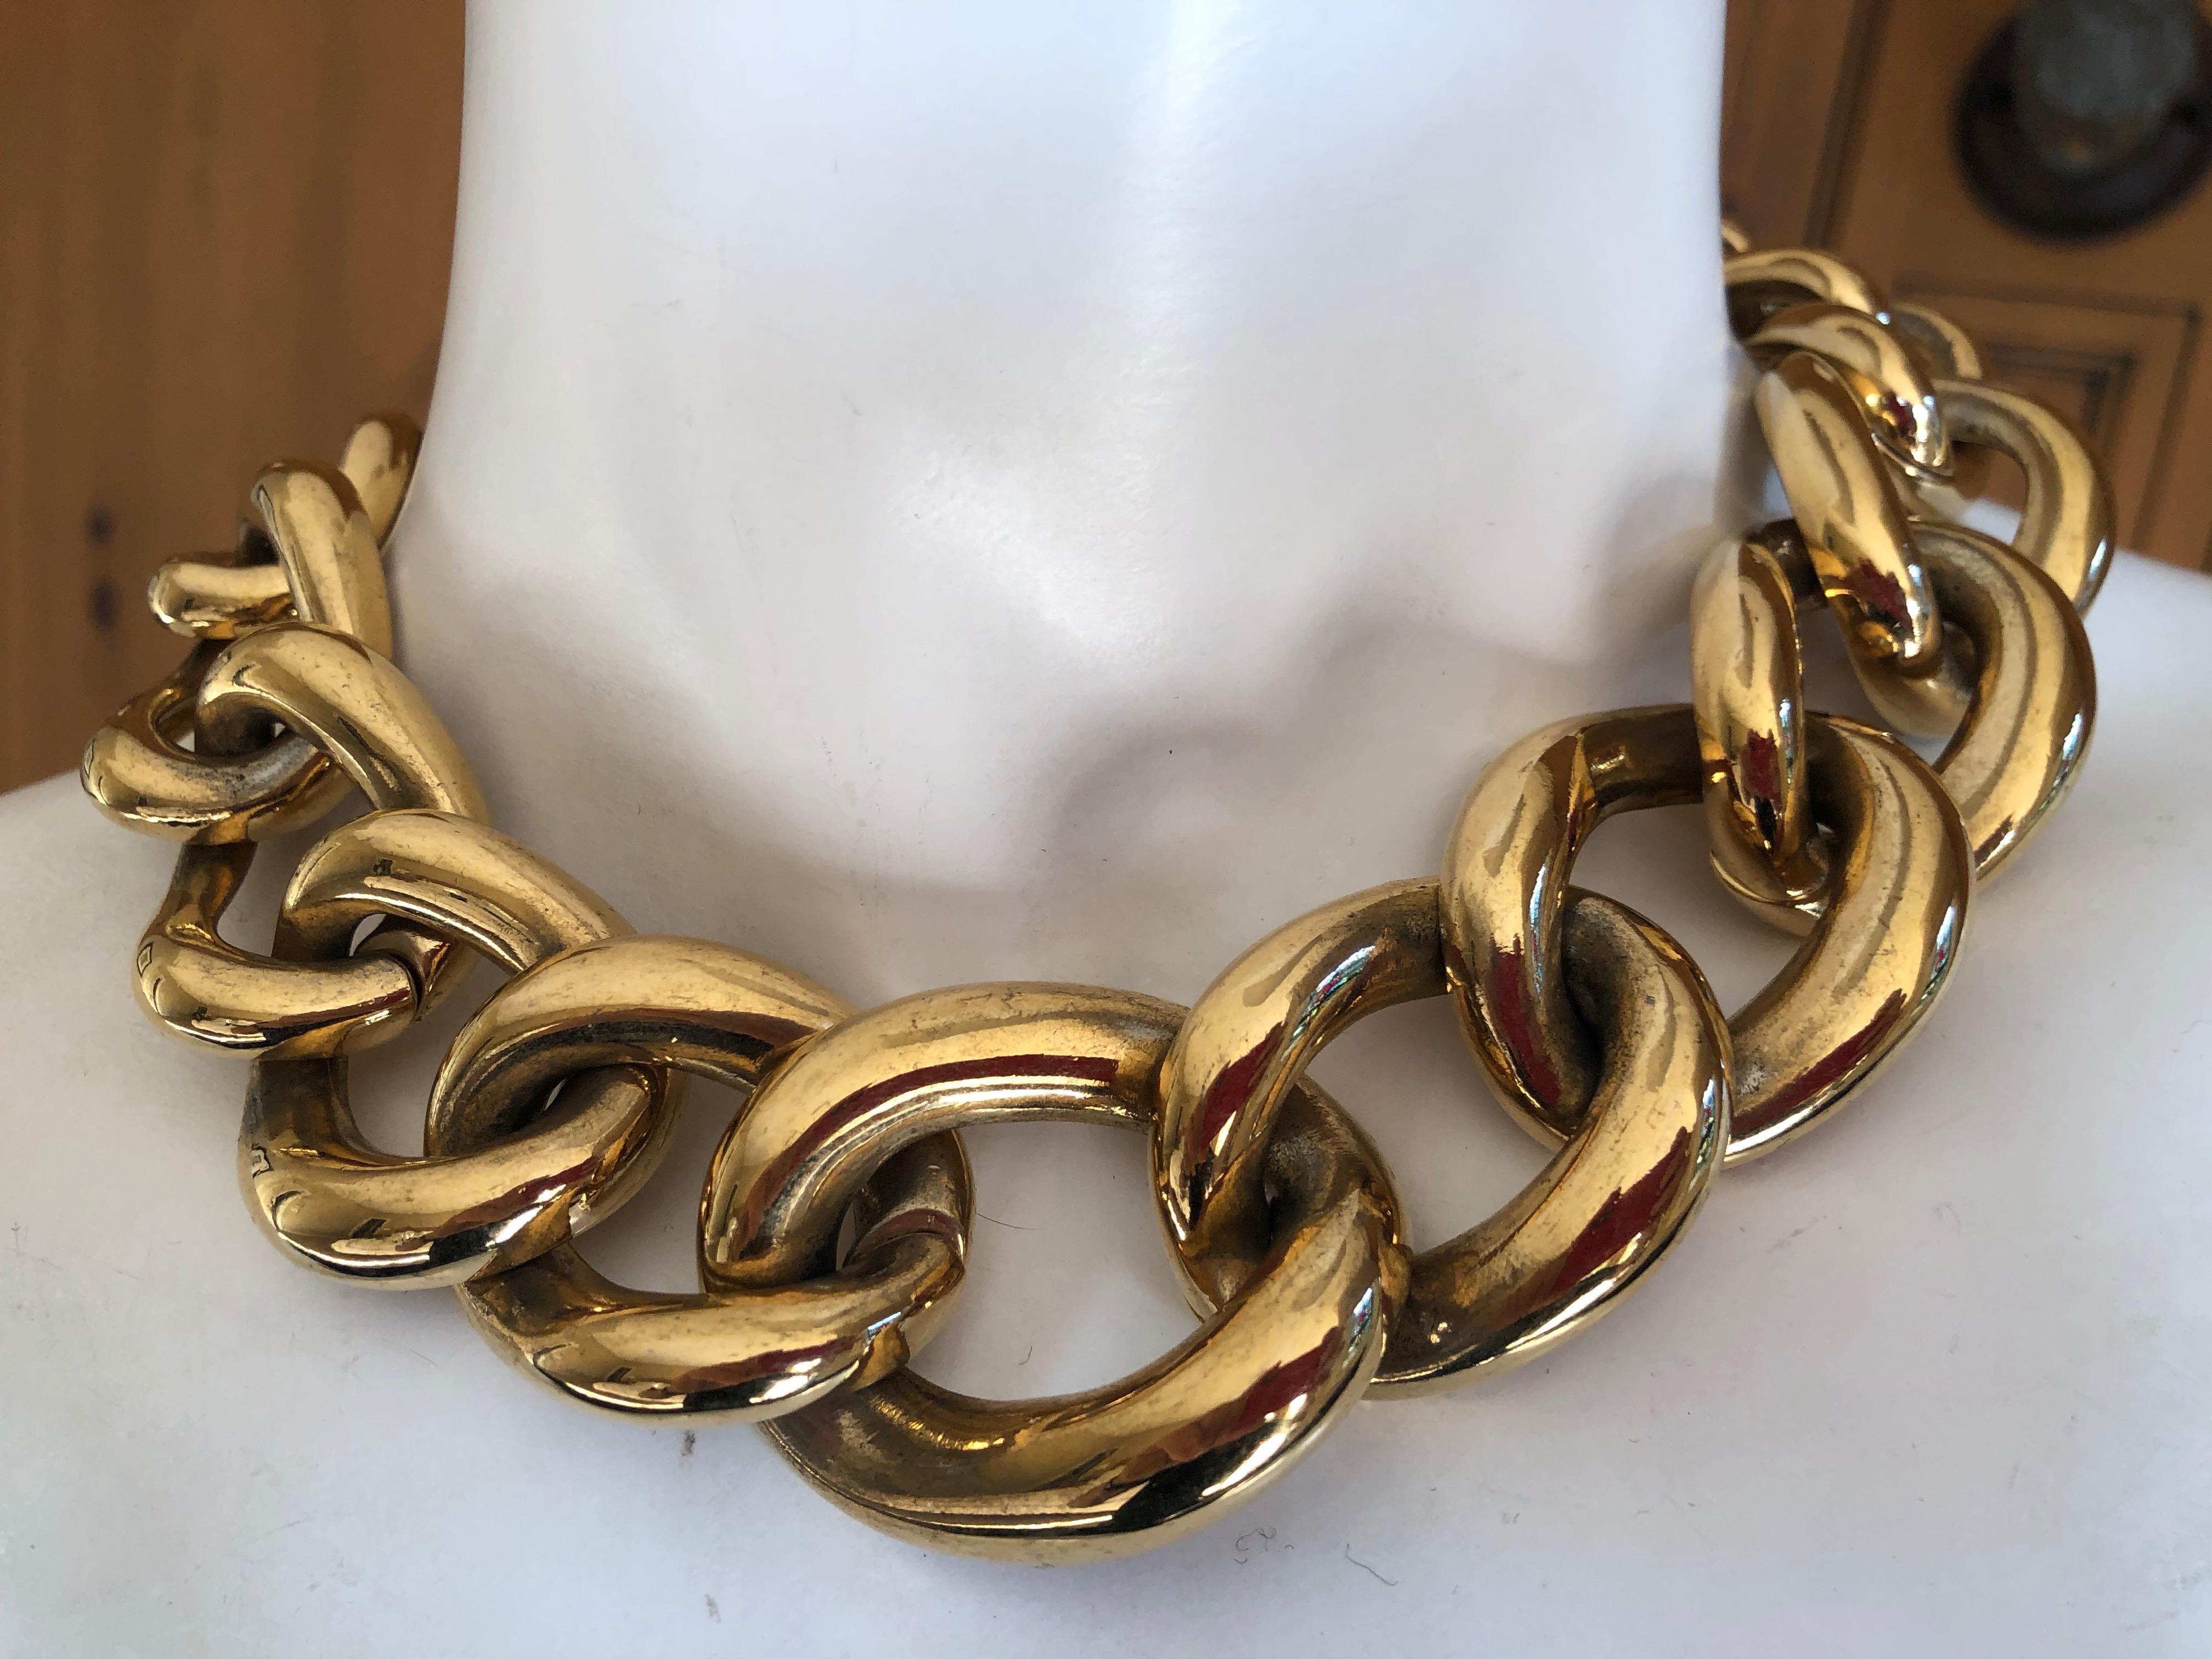 Givenchy Massive Vintage Bold Graduated Gold Link Necklace In Excellent Condition For Sale In Cloverdale, CA